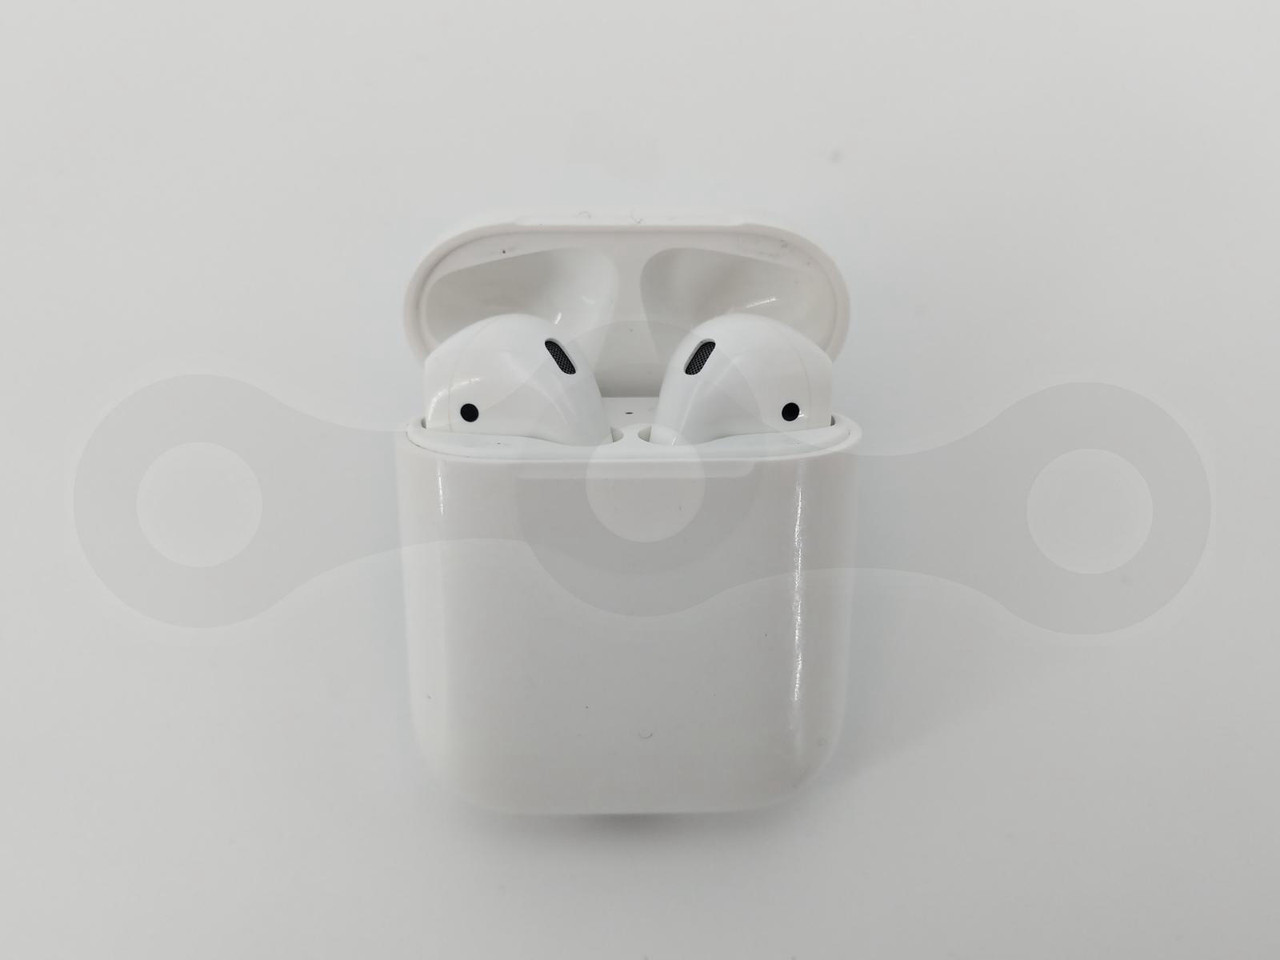 APPLE AIRPODS 1ST GENERATION GENUINE WIRELESS BLUETOOTH HEADPHONES EARBUDS  A1602